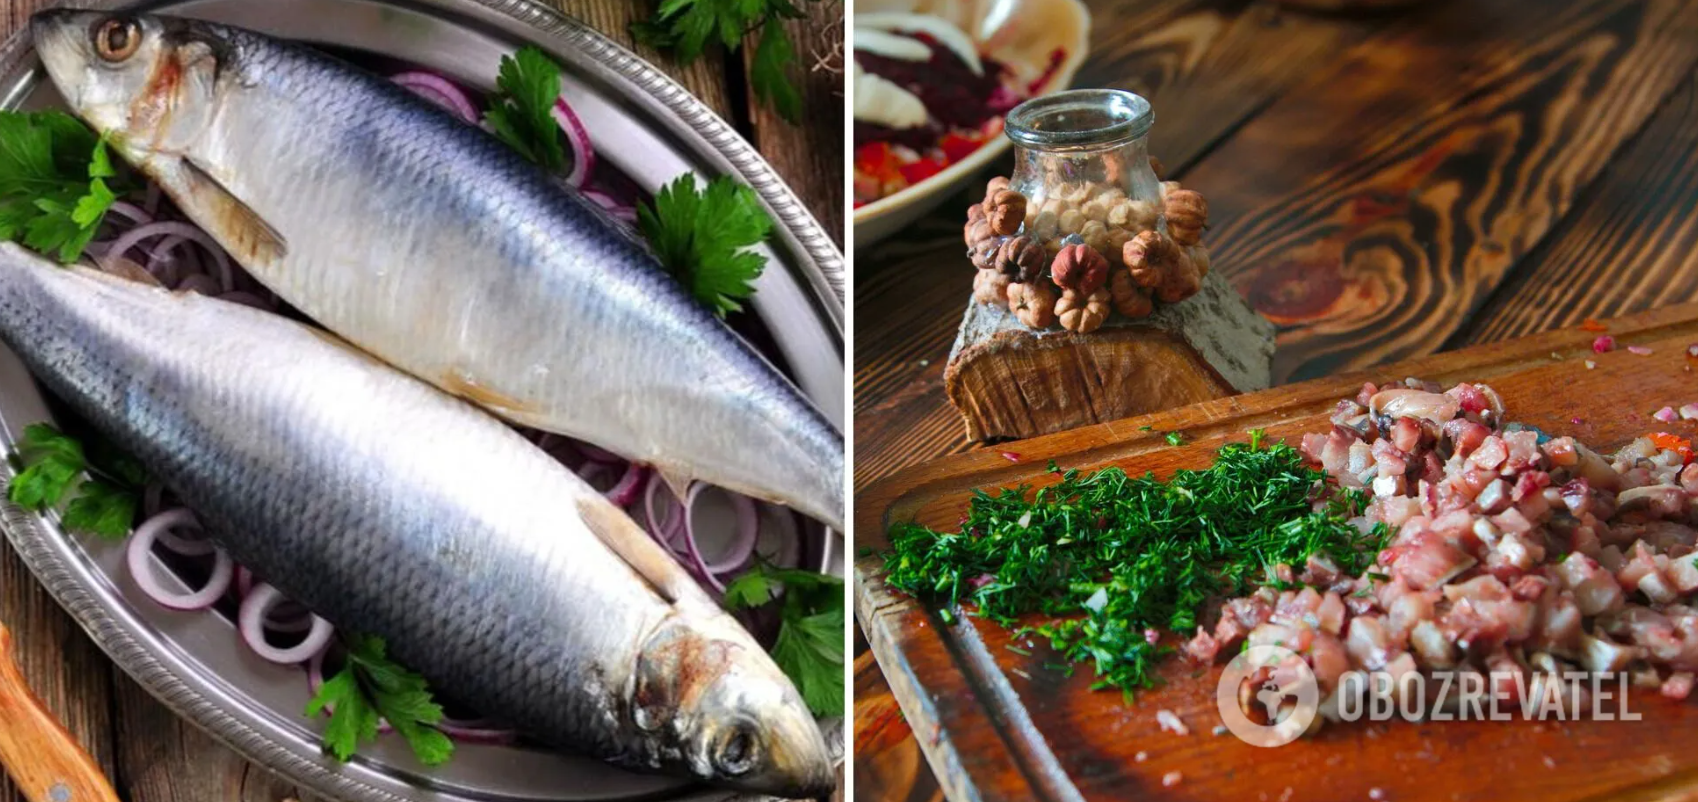 How to make herring spread